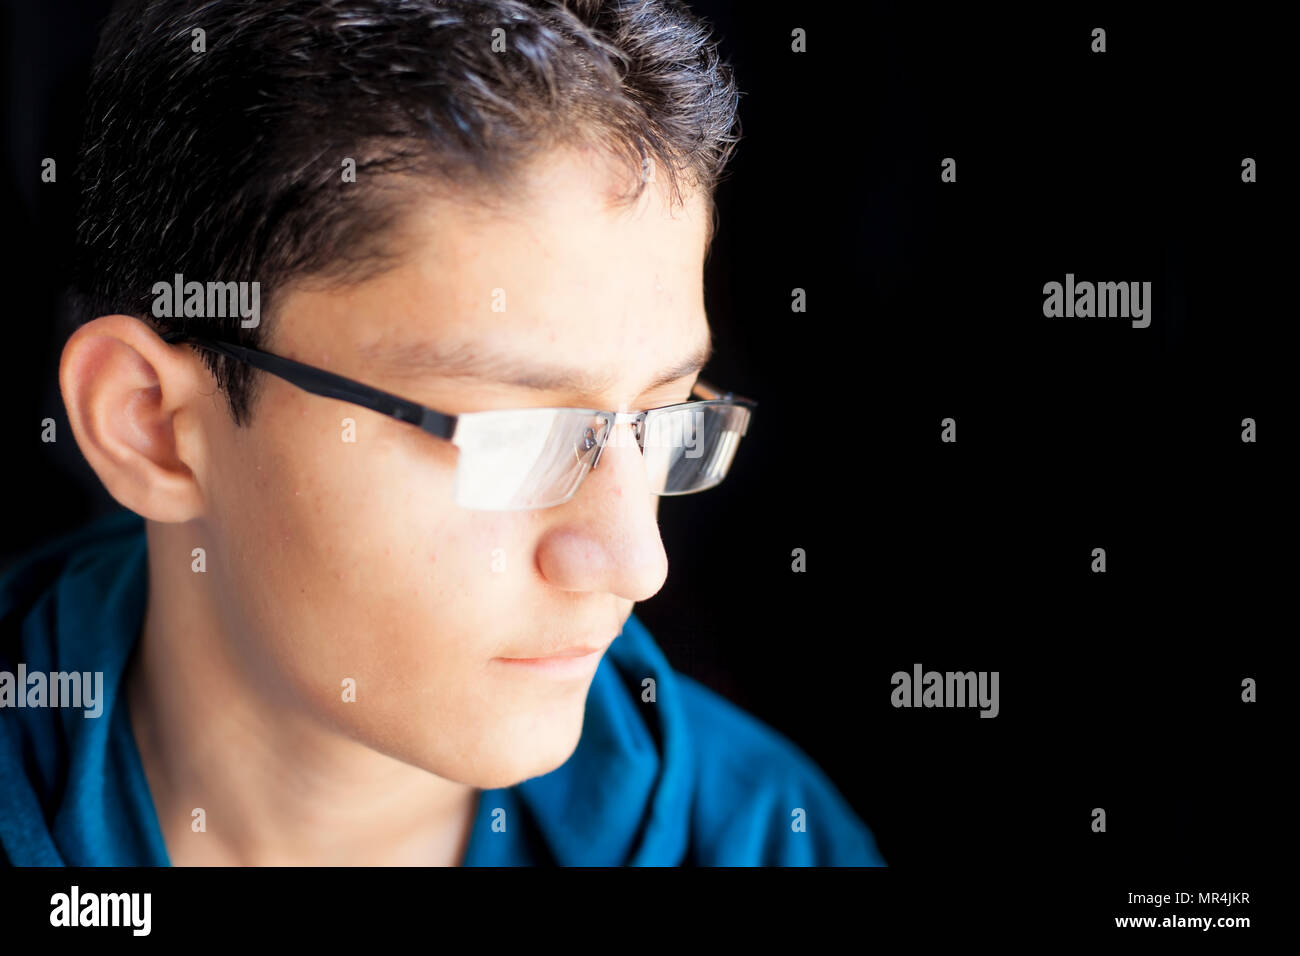 Portrait Of Young Teenager Boy Wearing Half Rim Black Colored Reading Glass Or Spectacles And A Green Hooded T Shirt Posing In Black Dark Background L Stock Photo Alamy